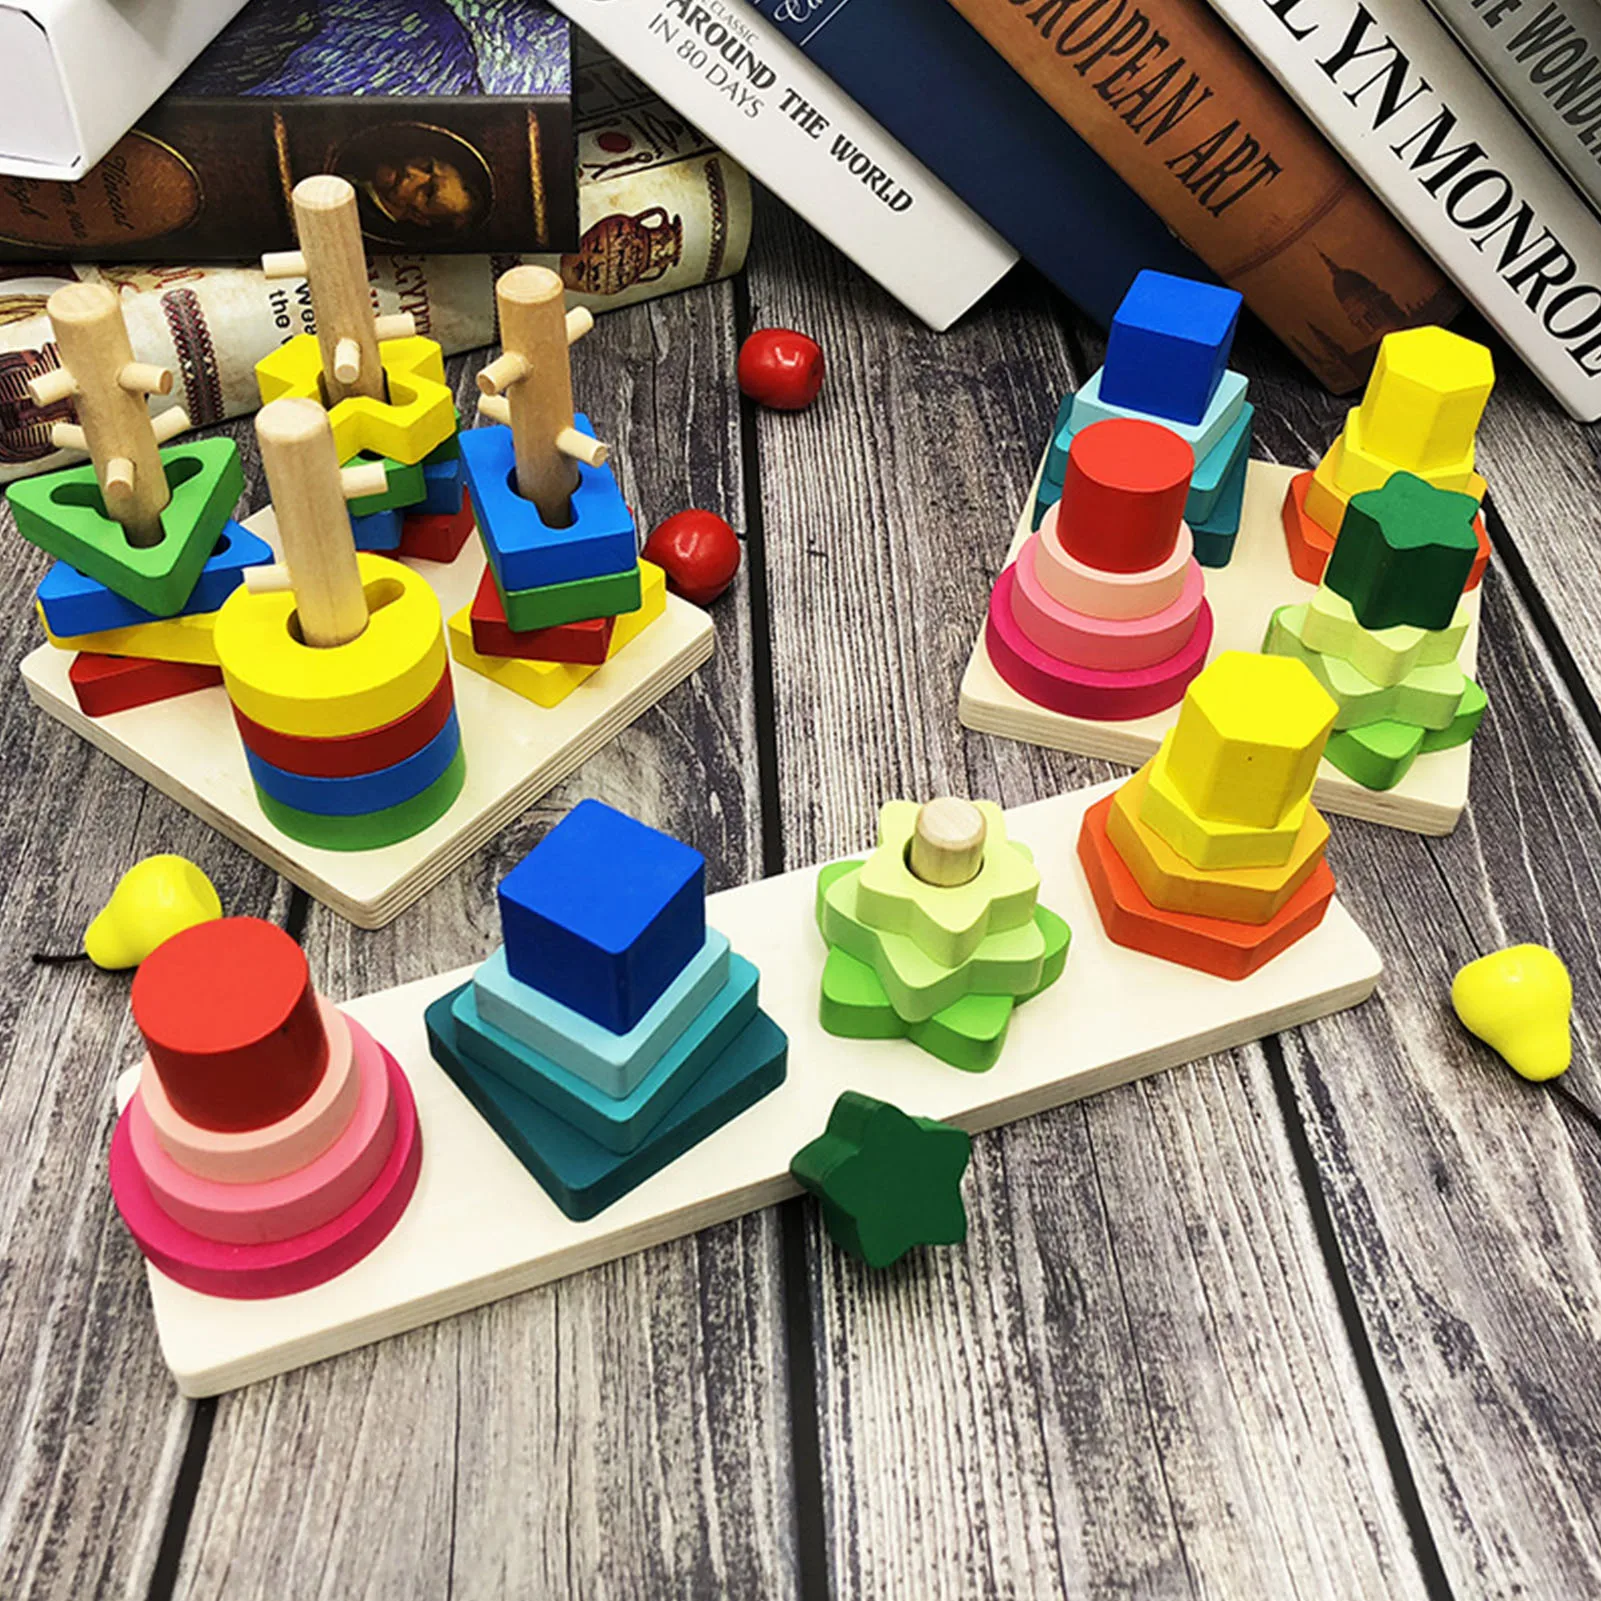 

DIY Wooden Puzzles Building Block Montessori Toys Wood Educational Geometric Recognition Stack Sort Kids Early Education Toy